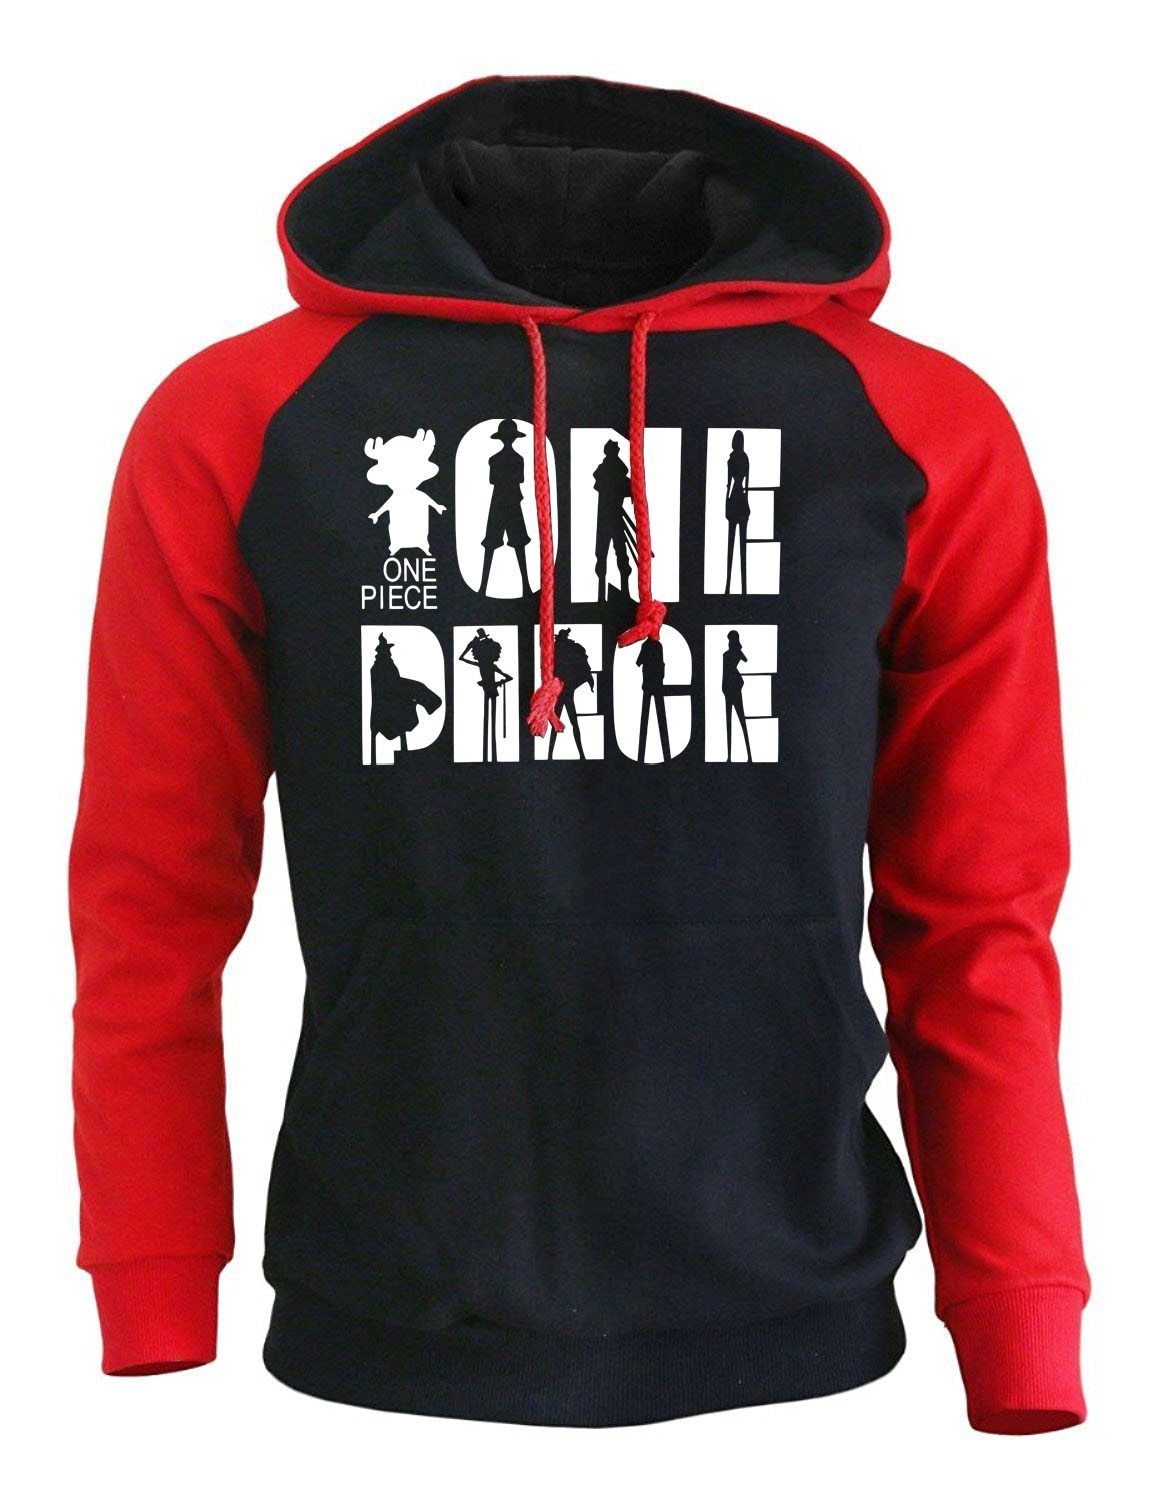 Straw Hats Hoodie MNK1108 rouge noir / S Official One Piece Merch